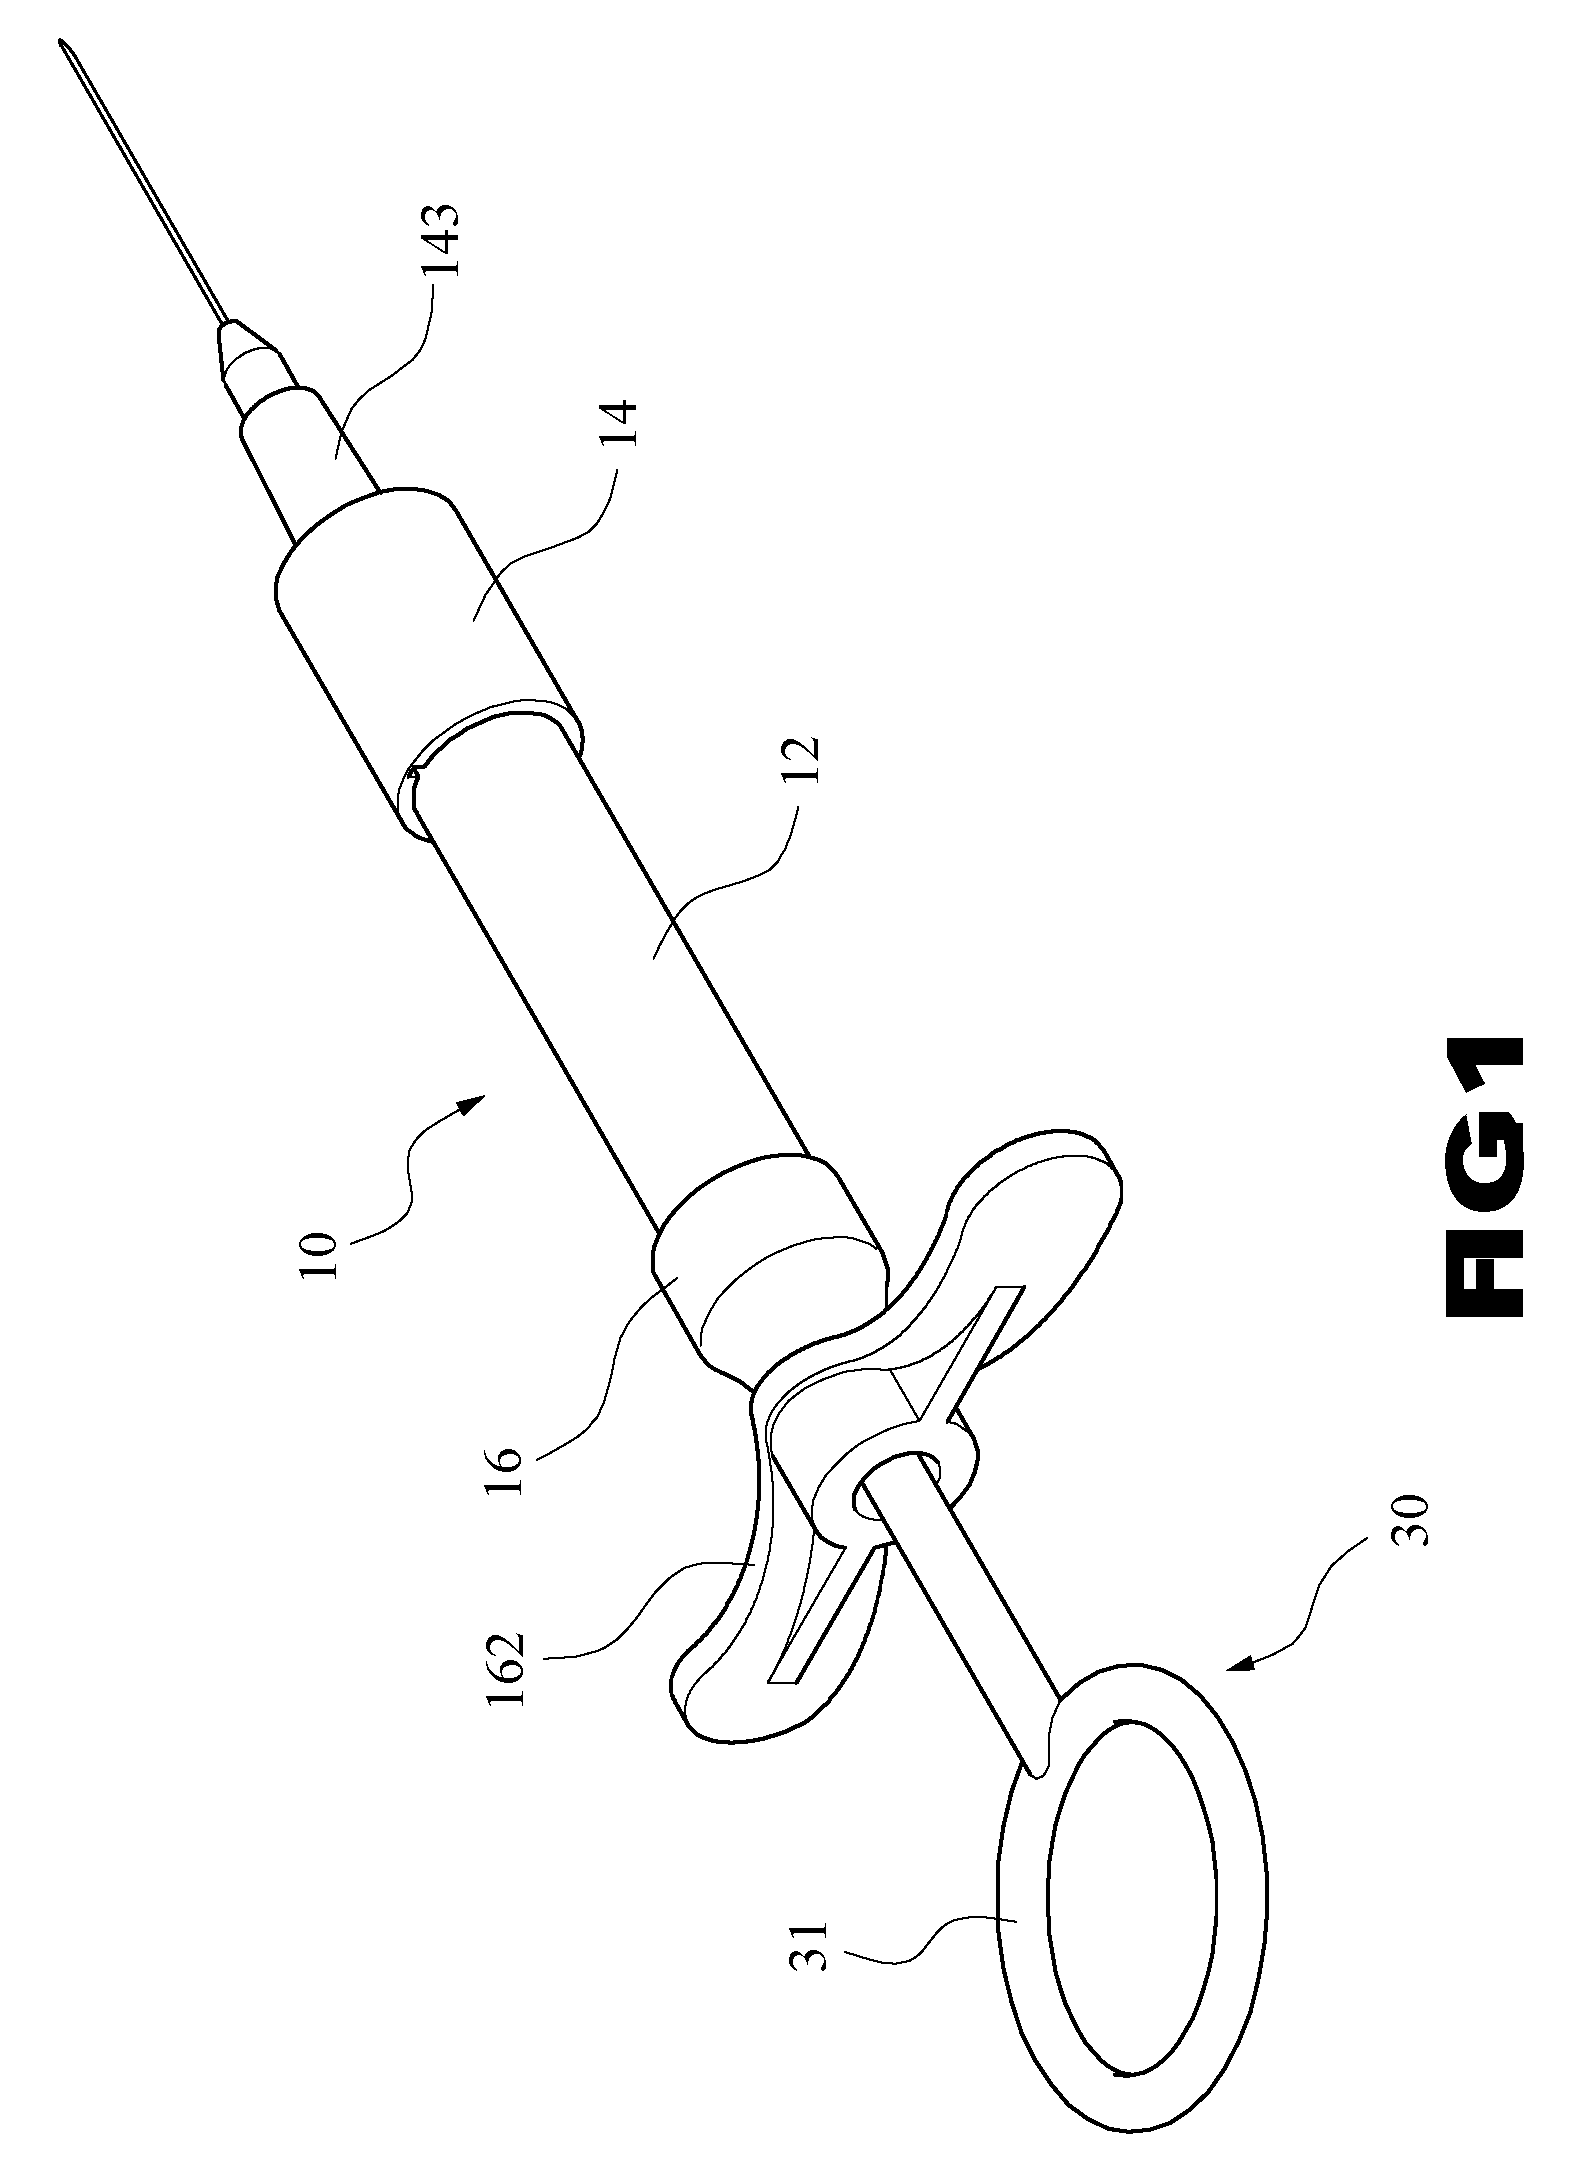 Safety syringe with disposable components after use